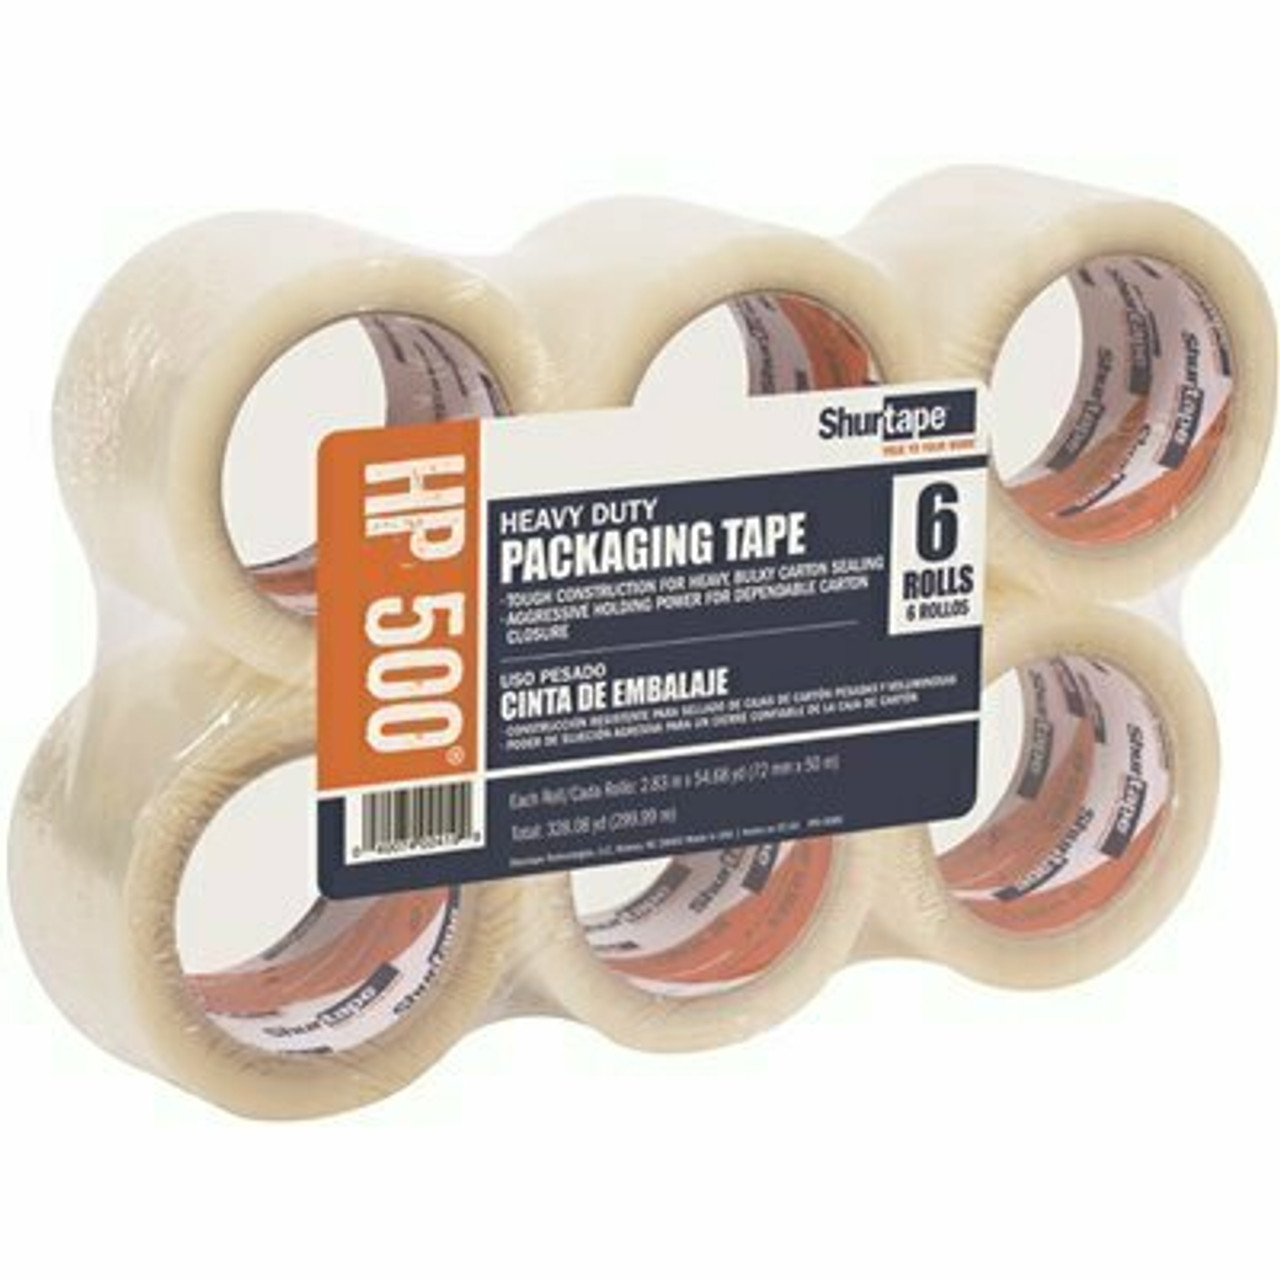 Shurtape Hp 500 Hot Melt Packaging Tape, Clear, 3 Mils, 72 Mm X 50 M (2.83 In. X 54 Yds.) [6-Pack]